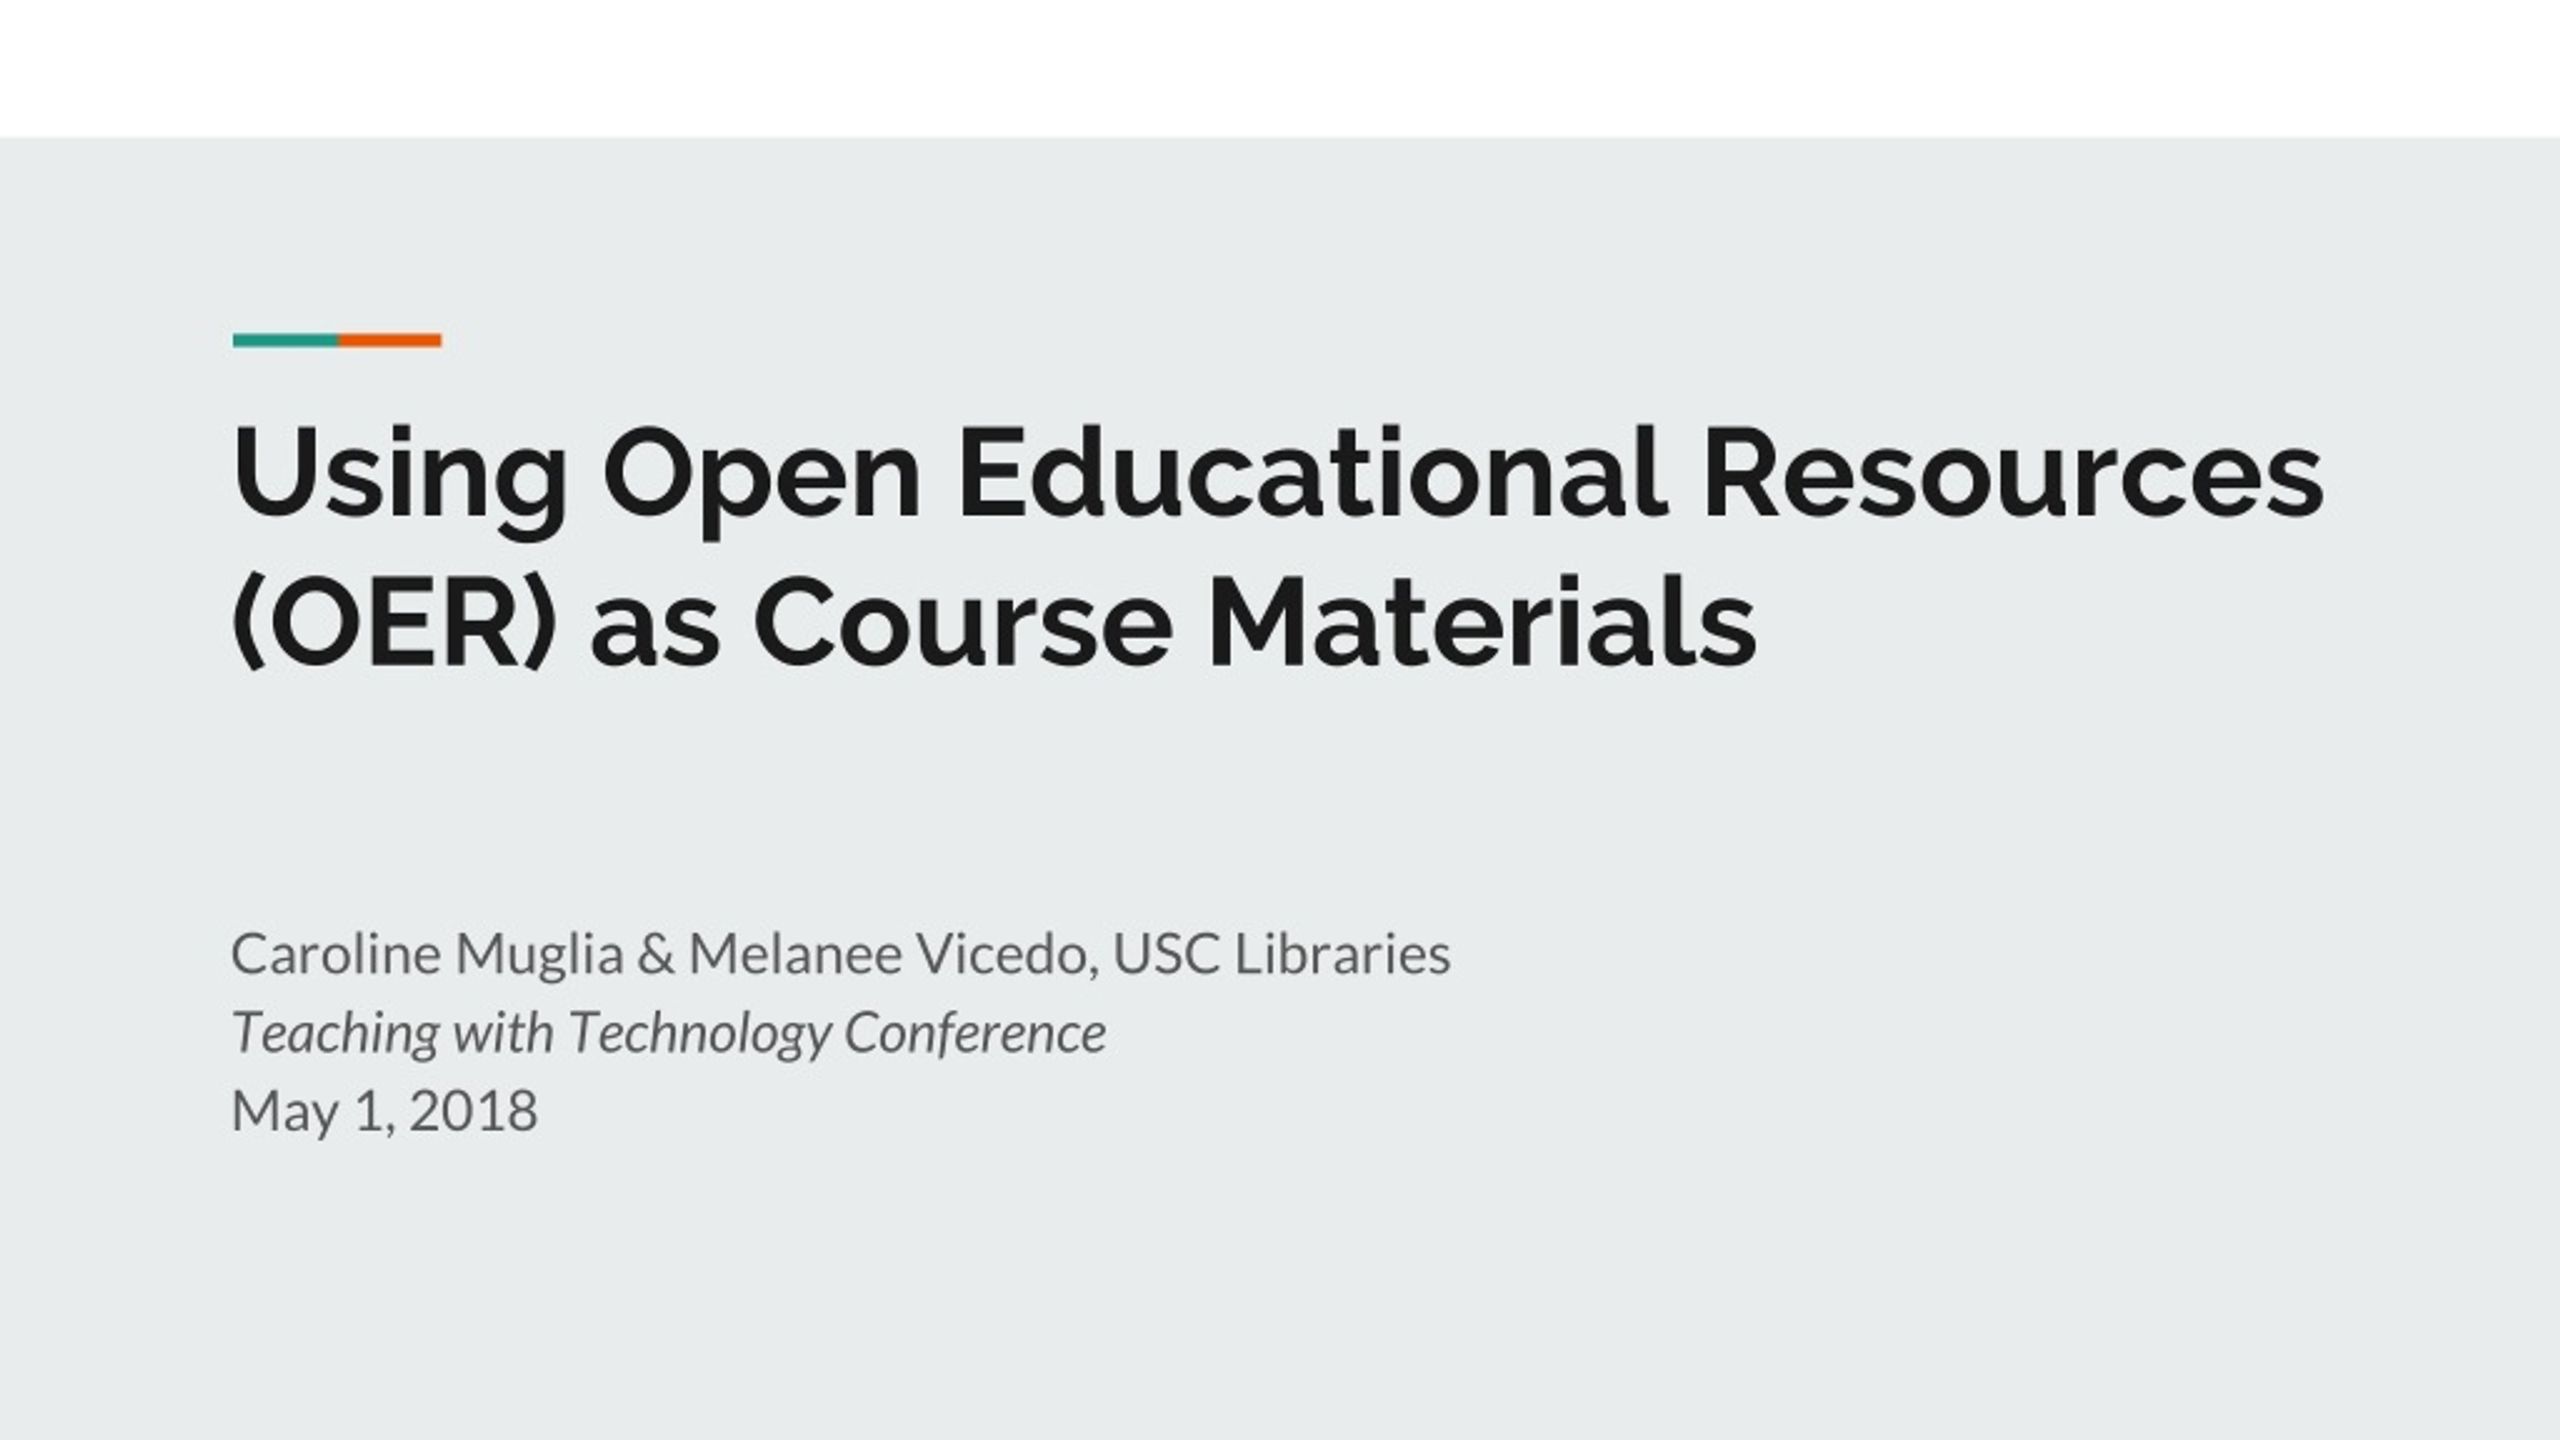 ppt on open educational resources